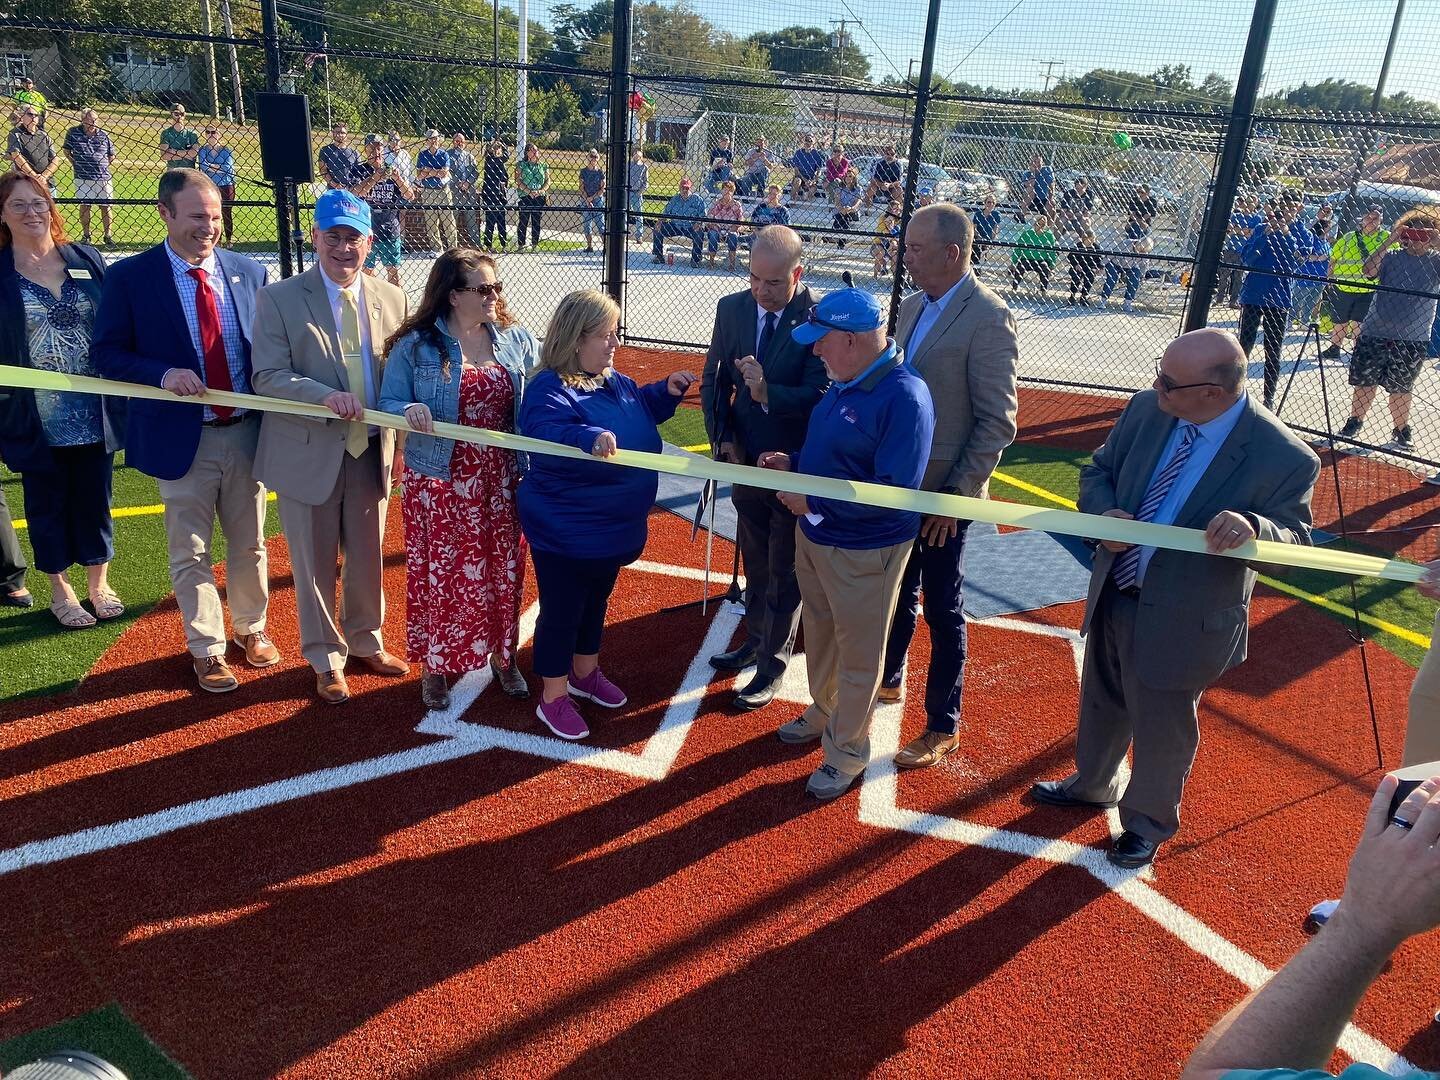 It was a beautiful day for the Ribbon Cutting Ceremony to celebrate the Grand Opening of the Vernon Miracle Field! 

We cant wait to continue to see all the amazing things that will happen at this field 

Come stop by to watch soccer currently Saturd